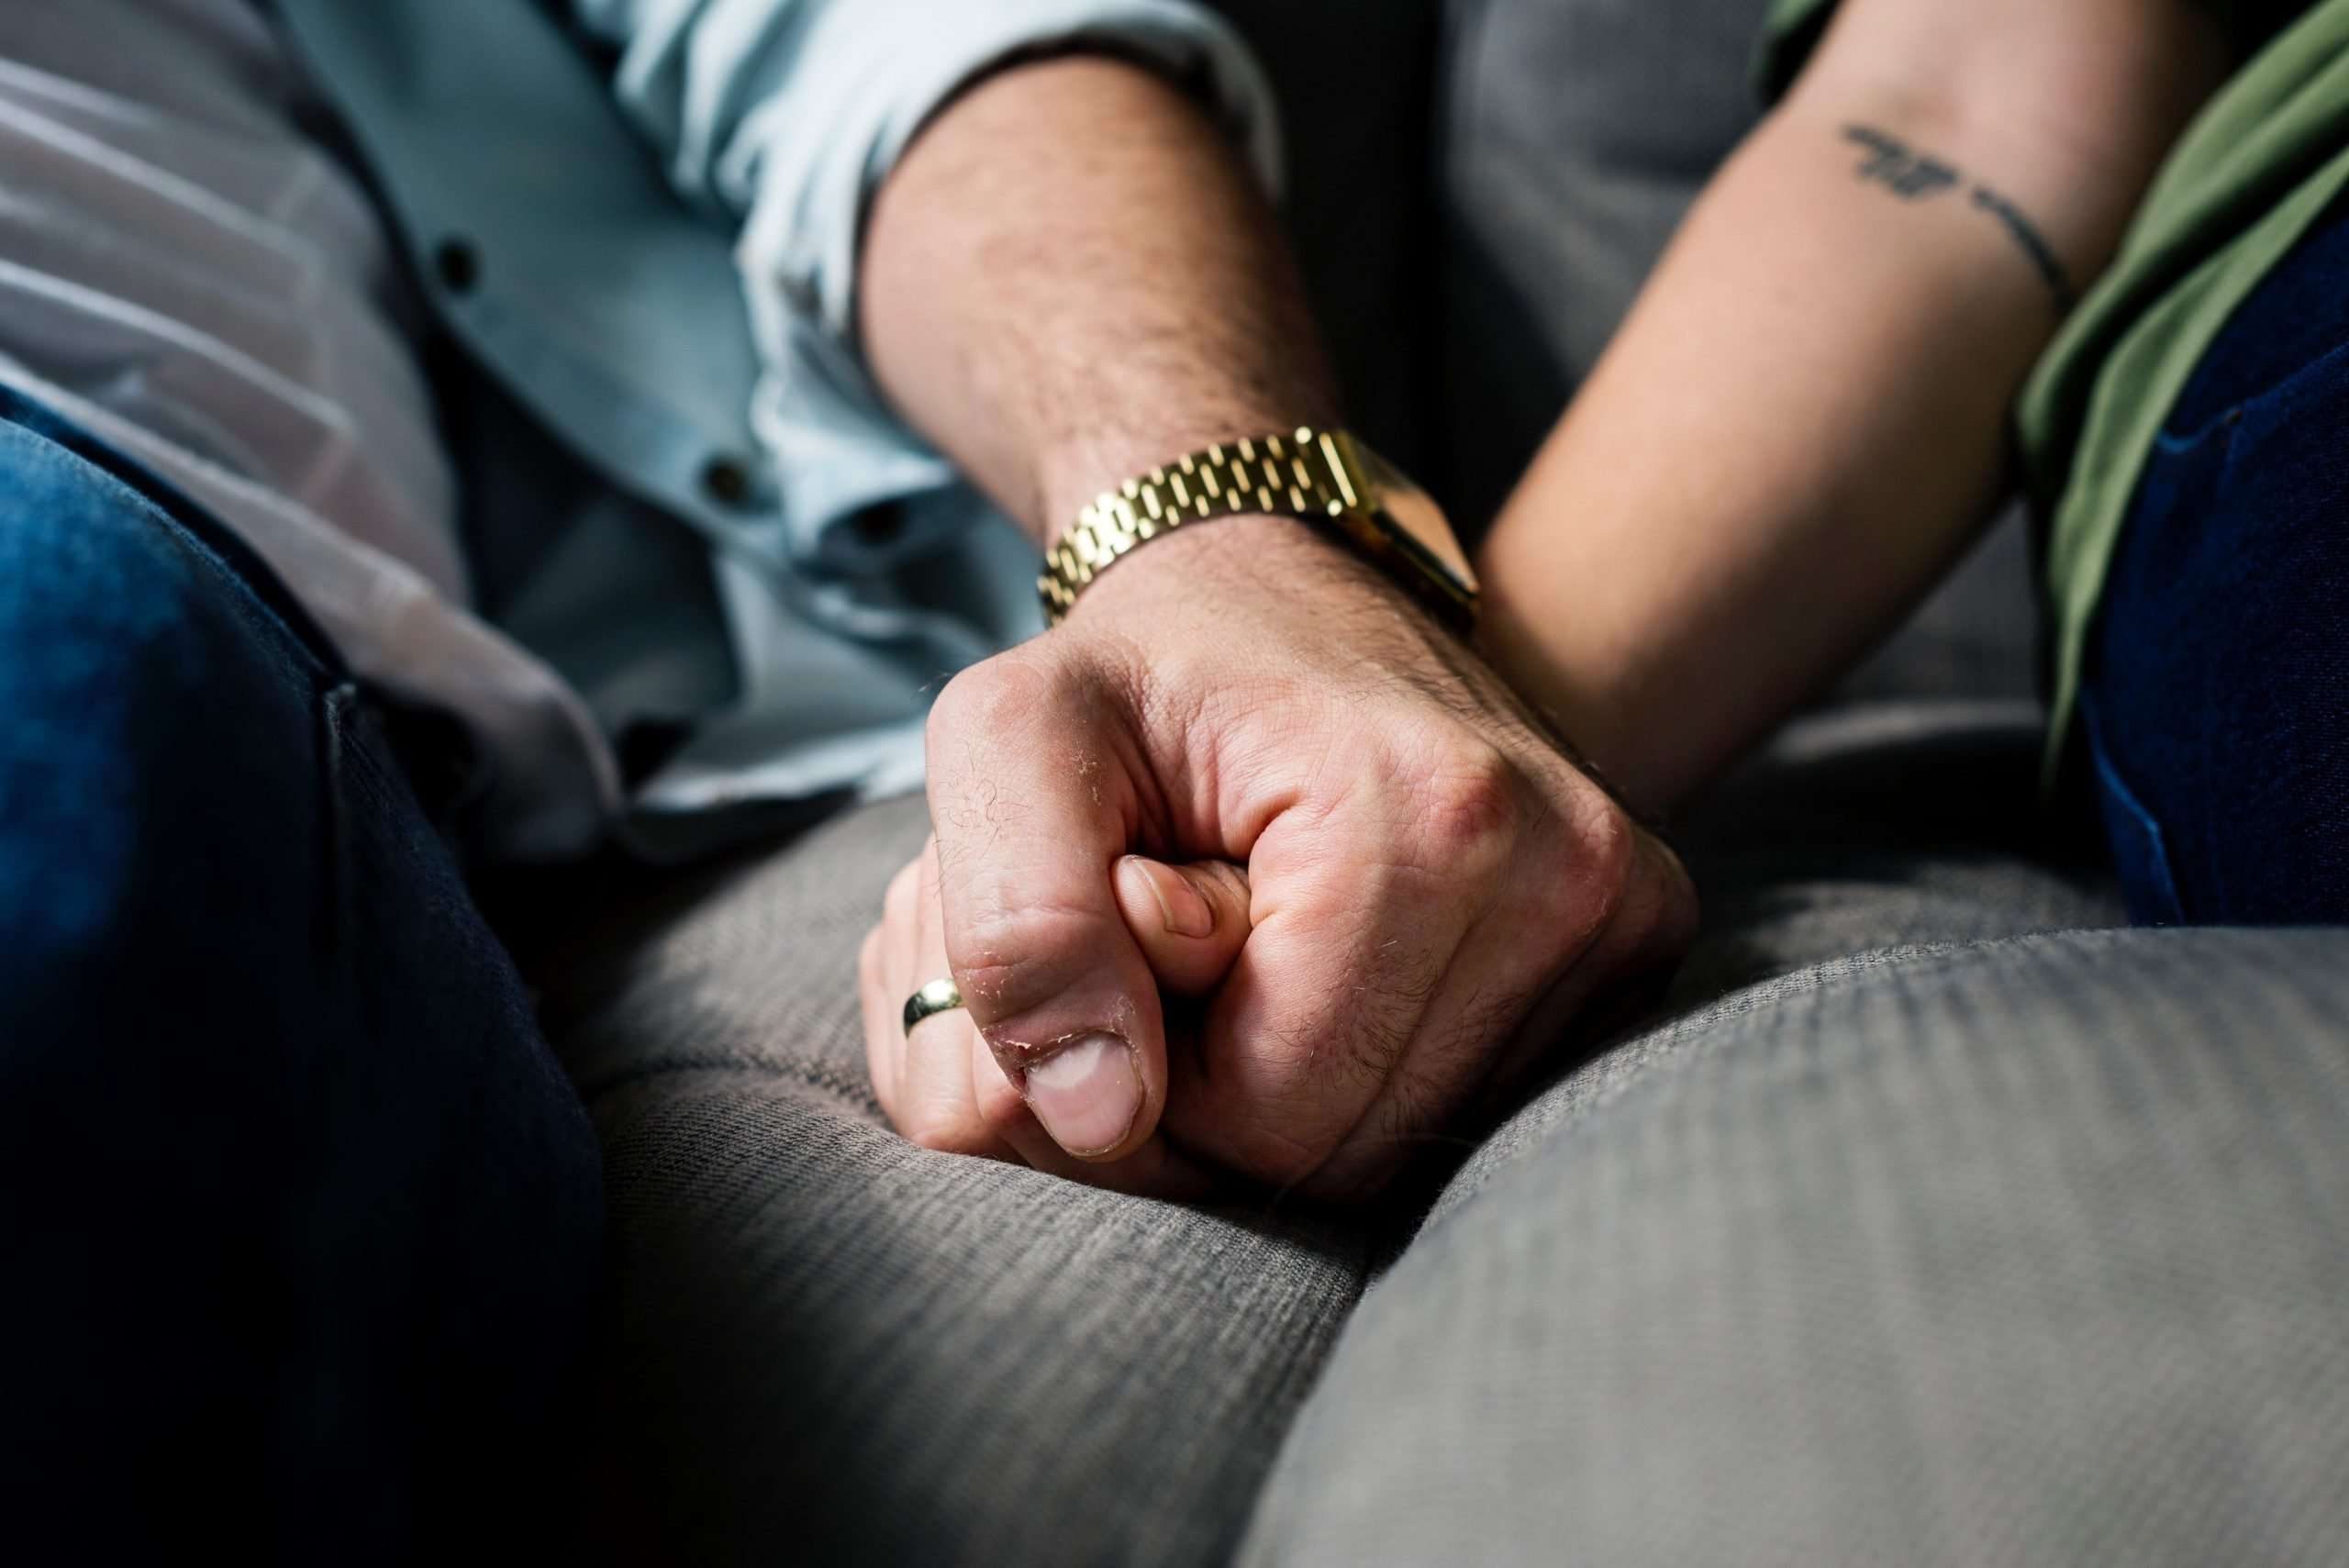 How to Get Your Loved One Into Addiction Treatment